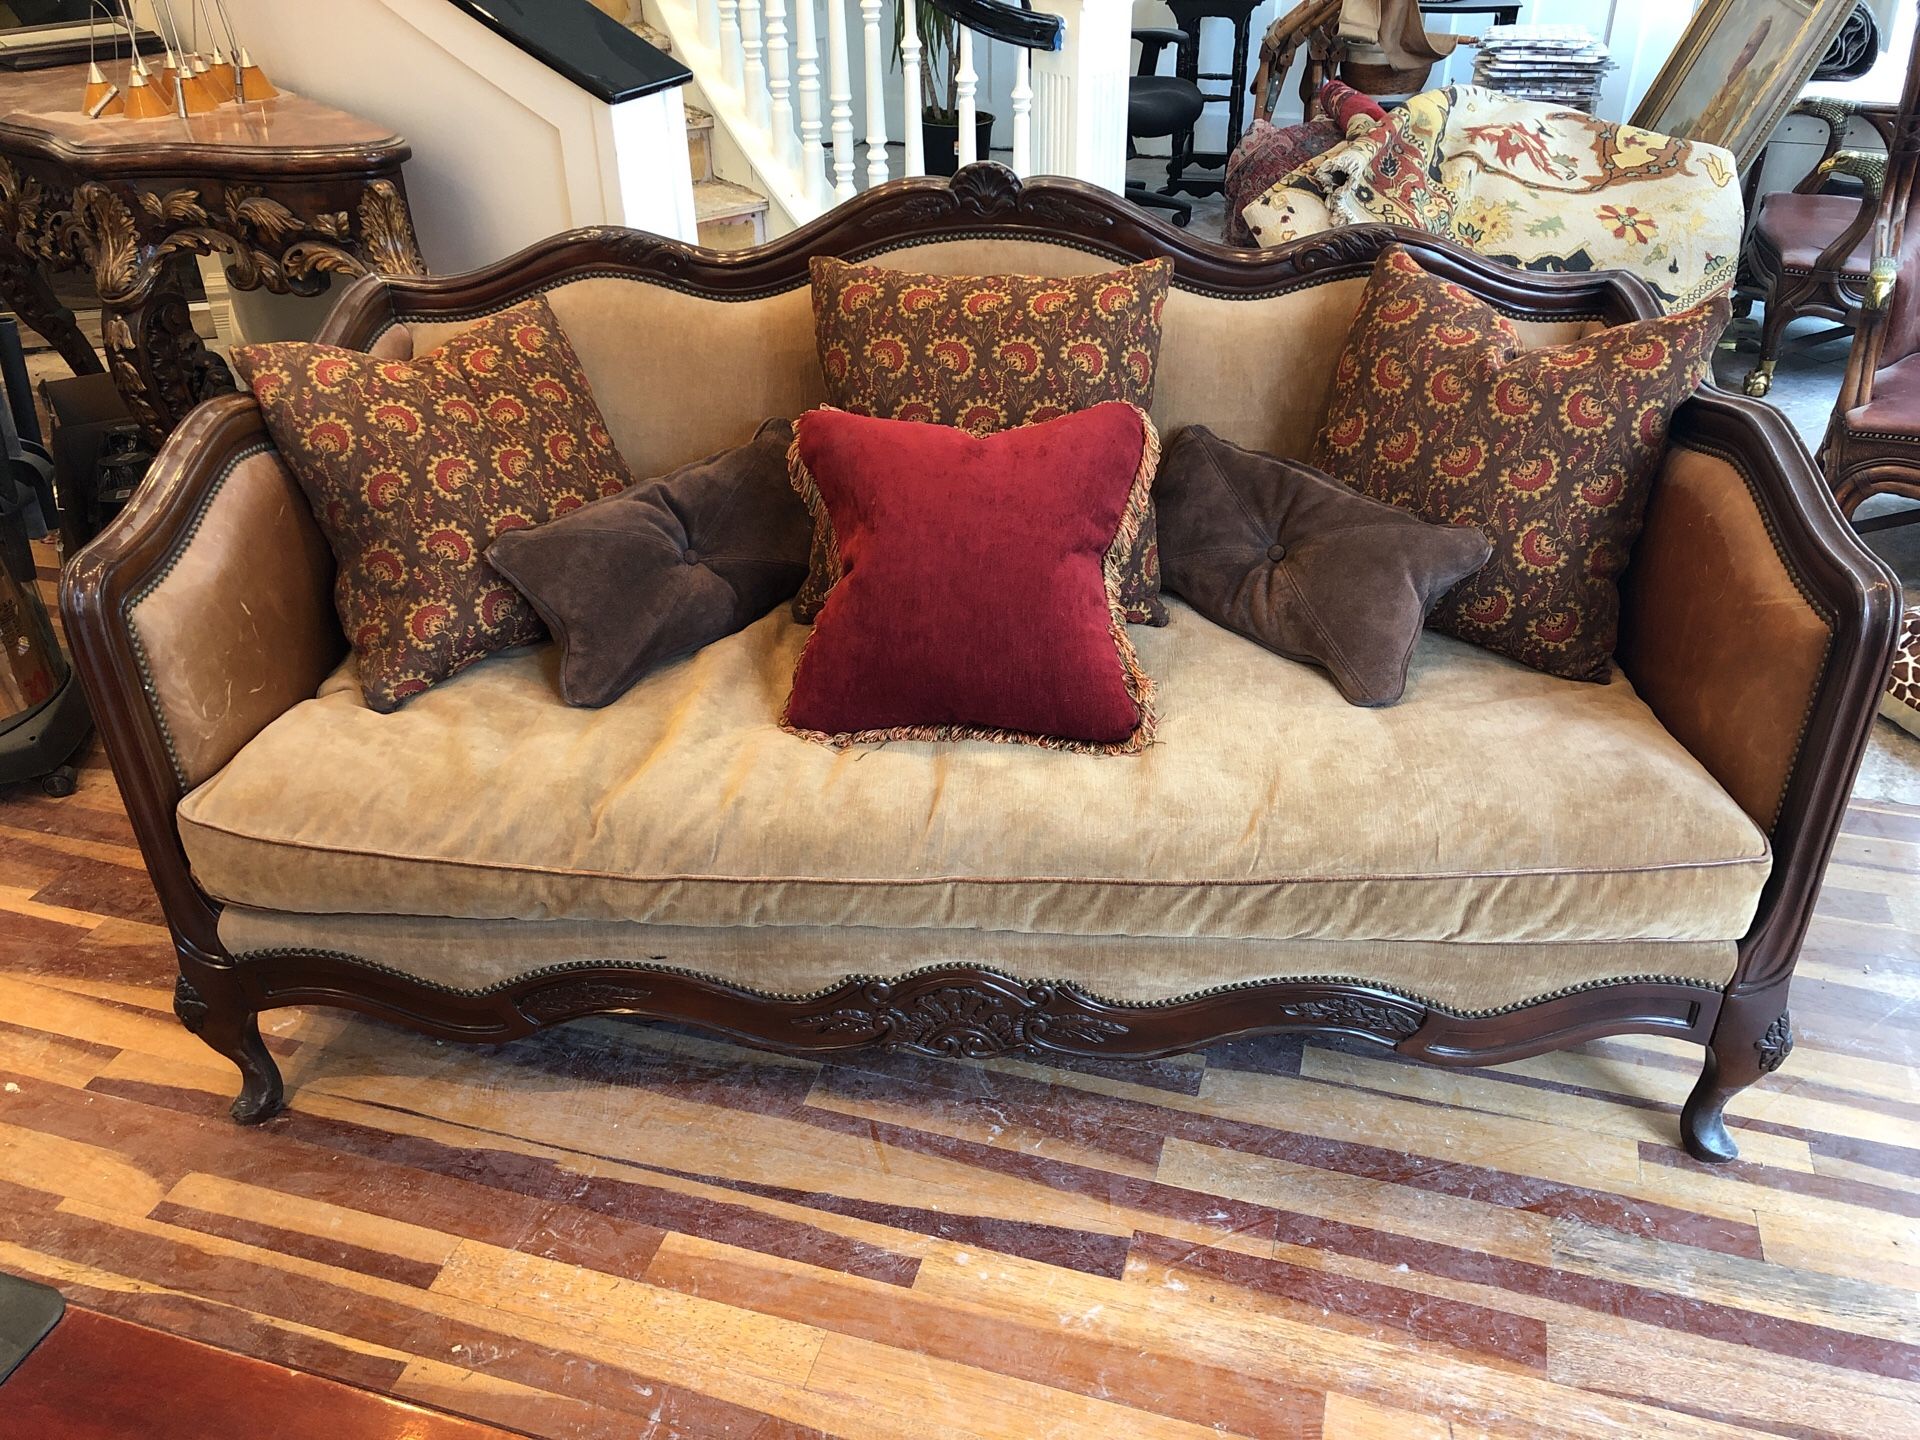 This is a Lillian August Collection, it’s was $3,000 new. We are moving to a new office and I need to get rid of it. This sofa is filled with down an